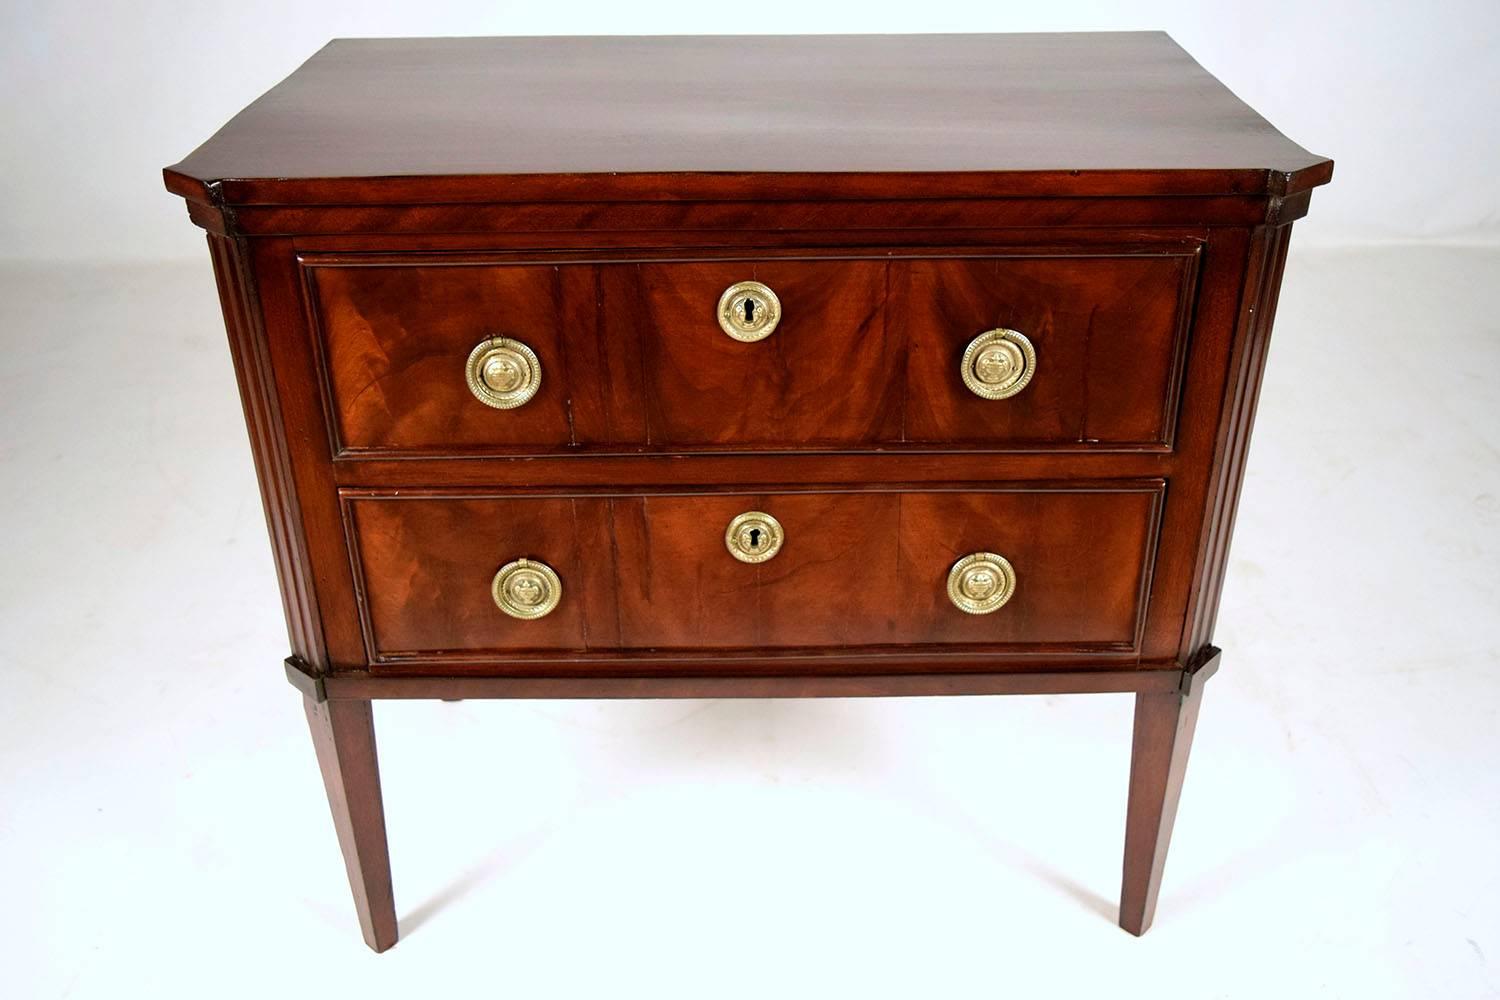 This 1910s French Empire-style chest is made from mahogany wood finished in a beautiful dark mahogany color stain finish. The chest features two full size drawers with delicate mouldings adorning their facades and two decorative brass drawer pulls